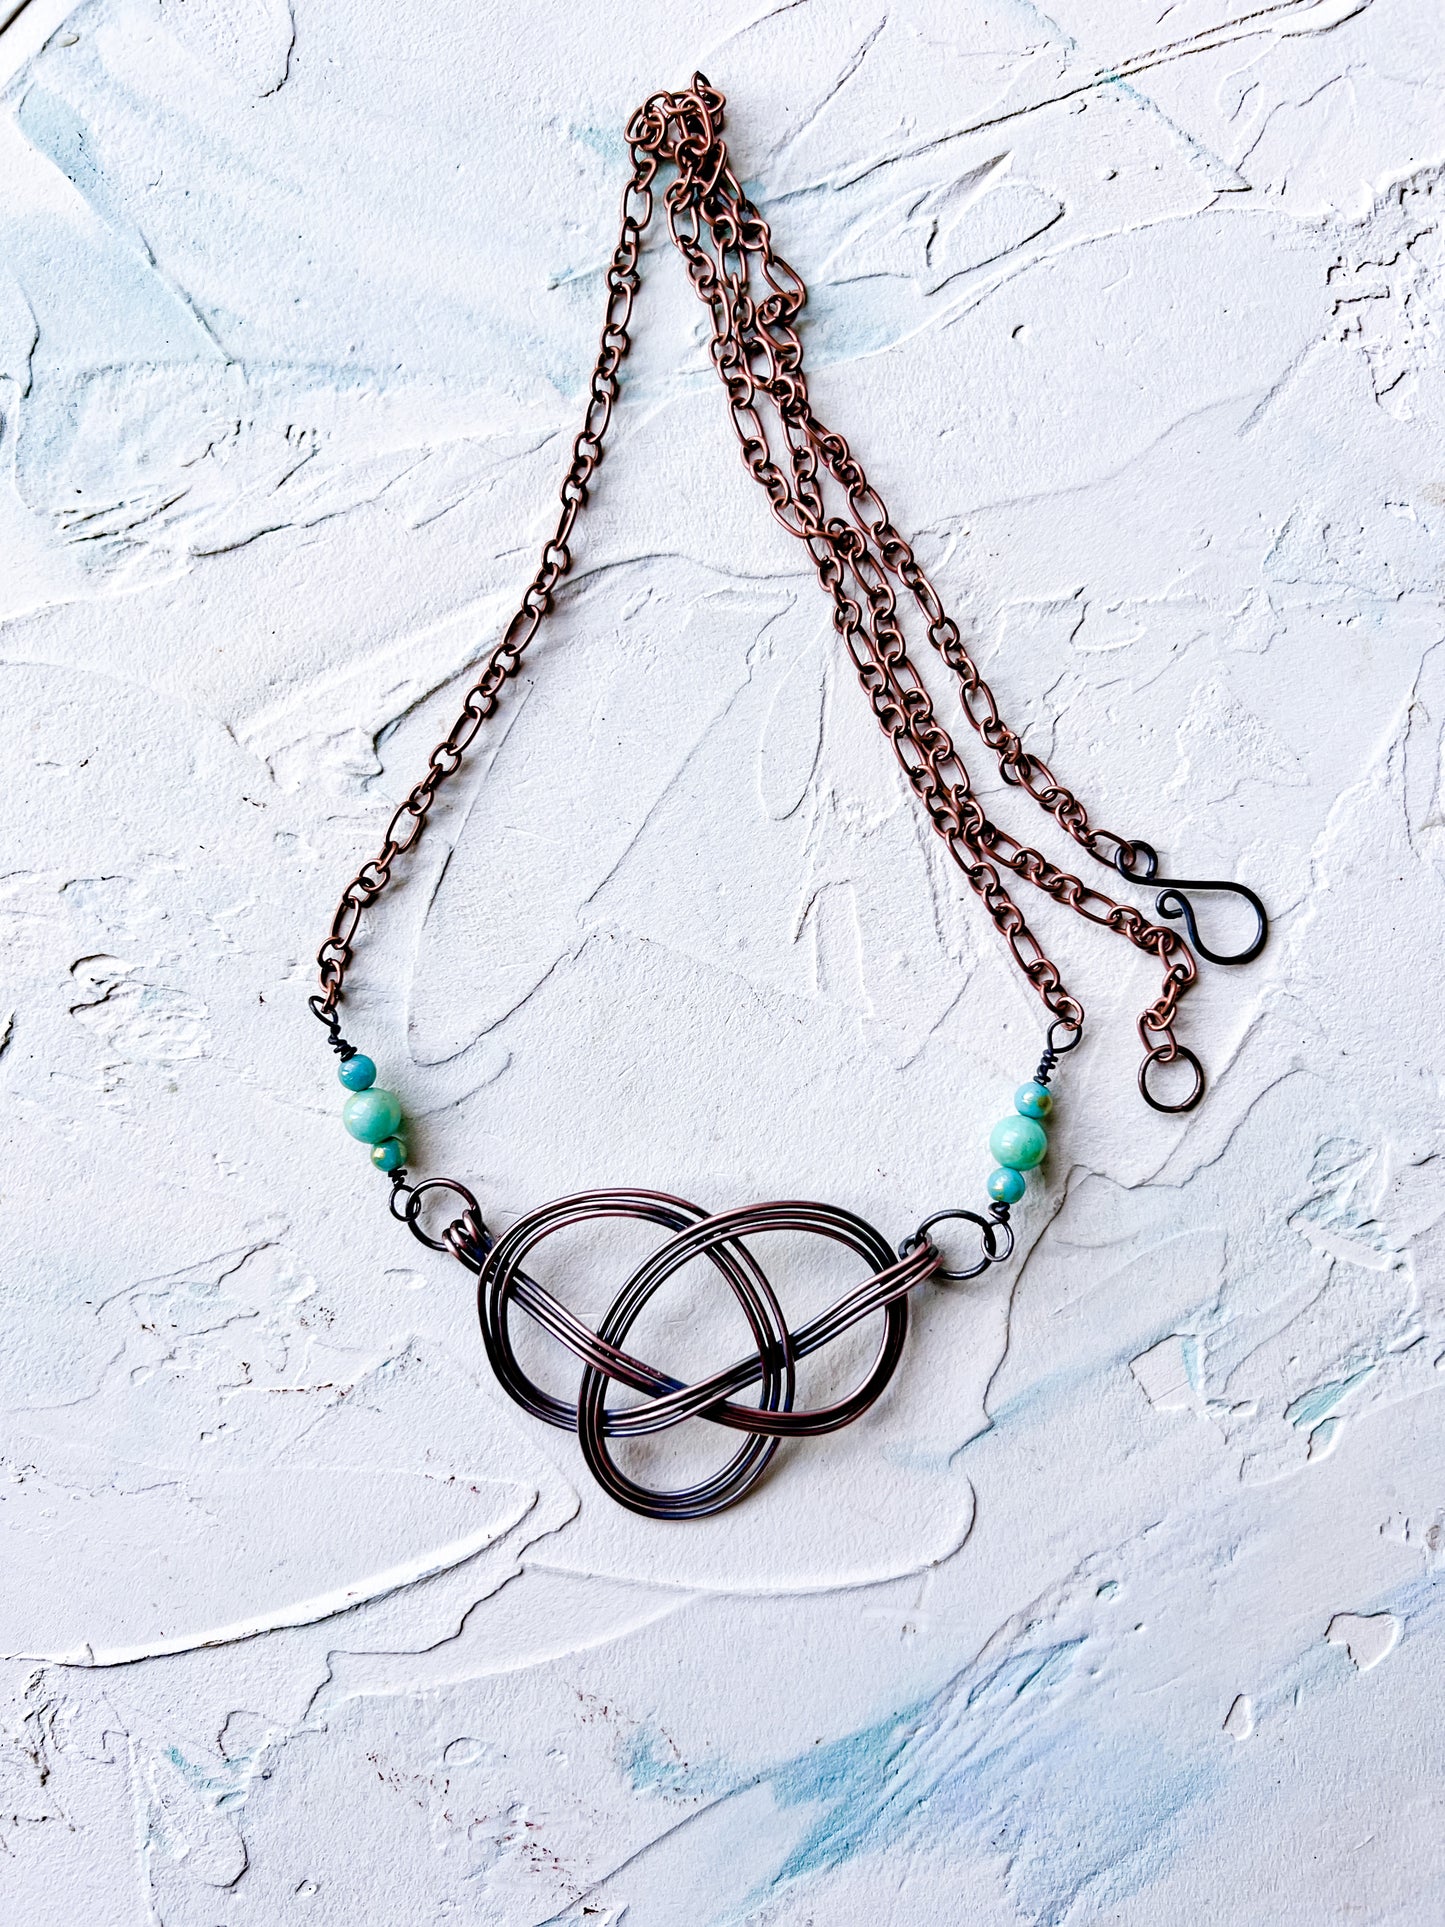 Celtic Knot in Copper with Jade Accent Beads